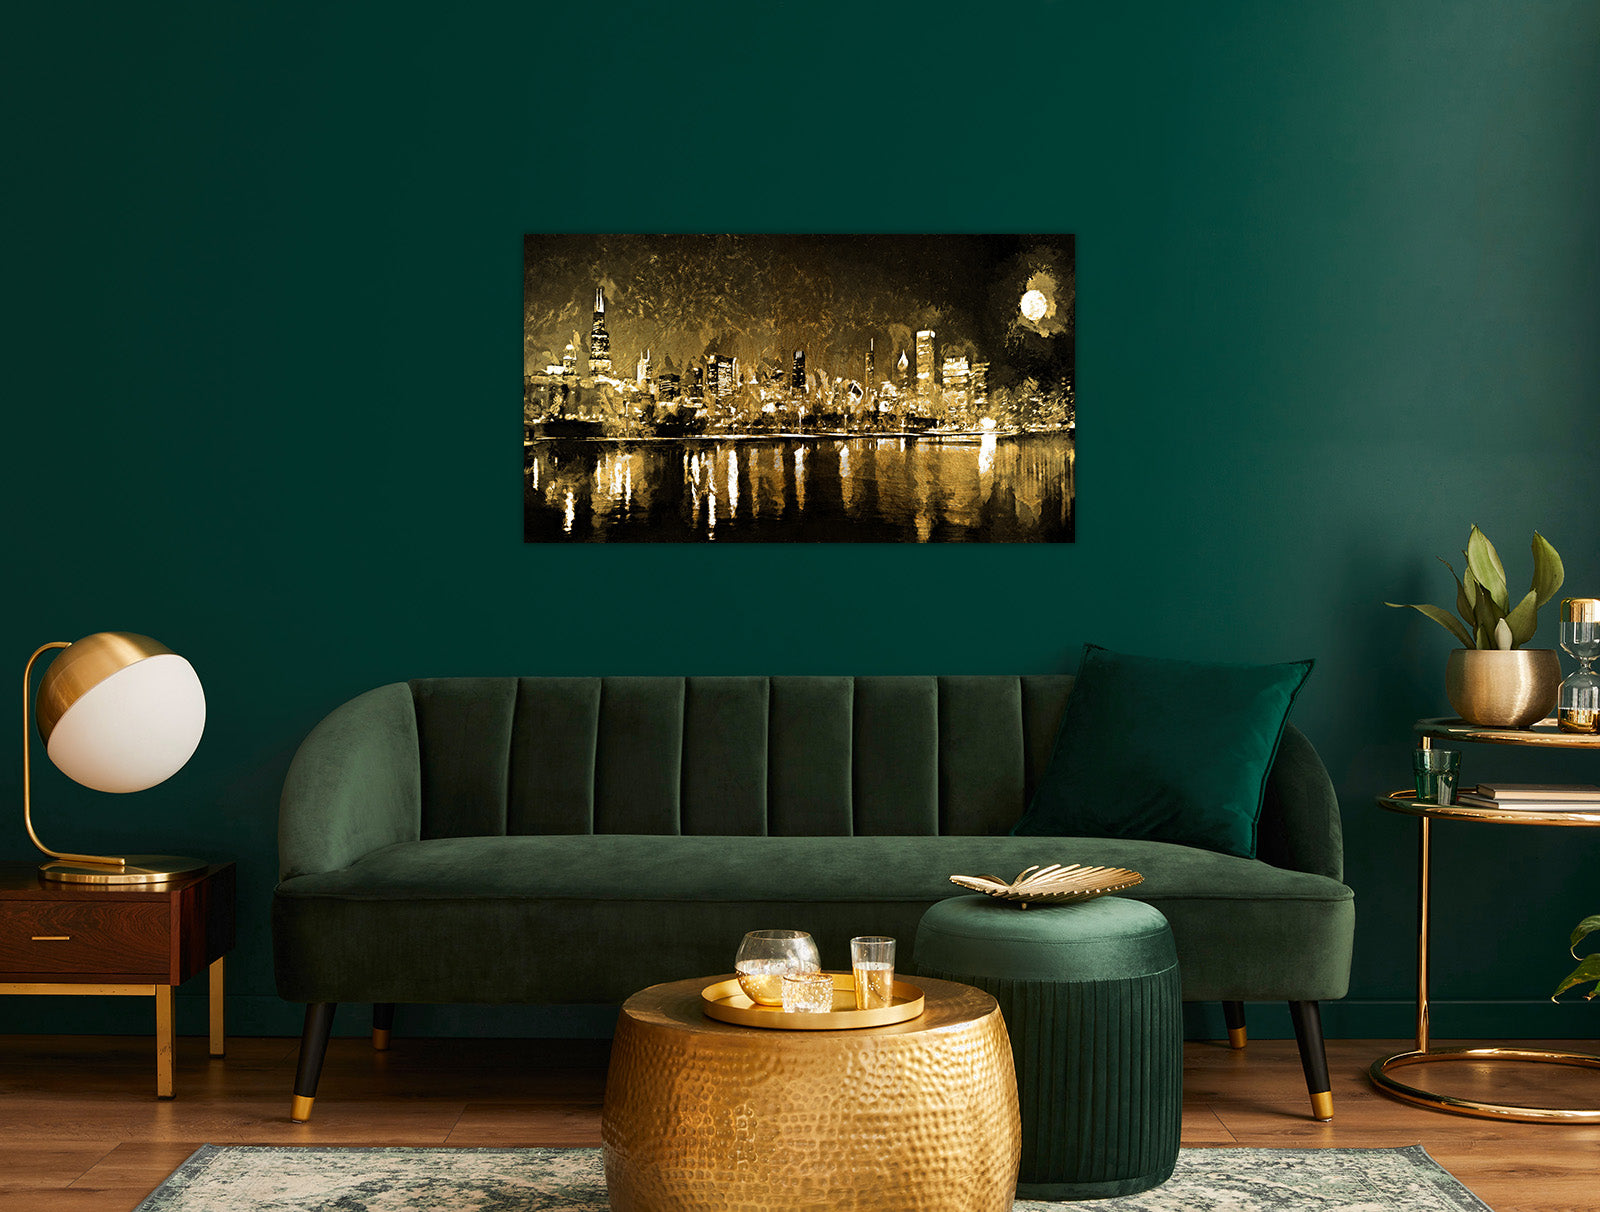 Black and Gold Wall Painting (City On River)